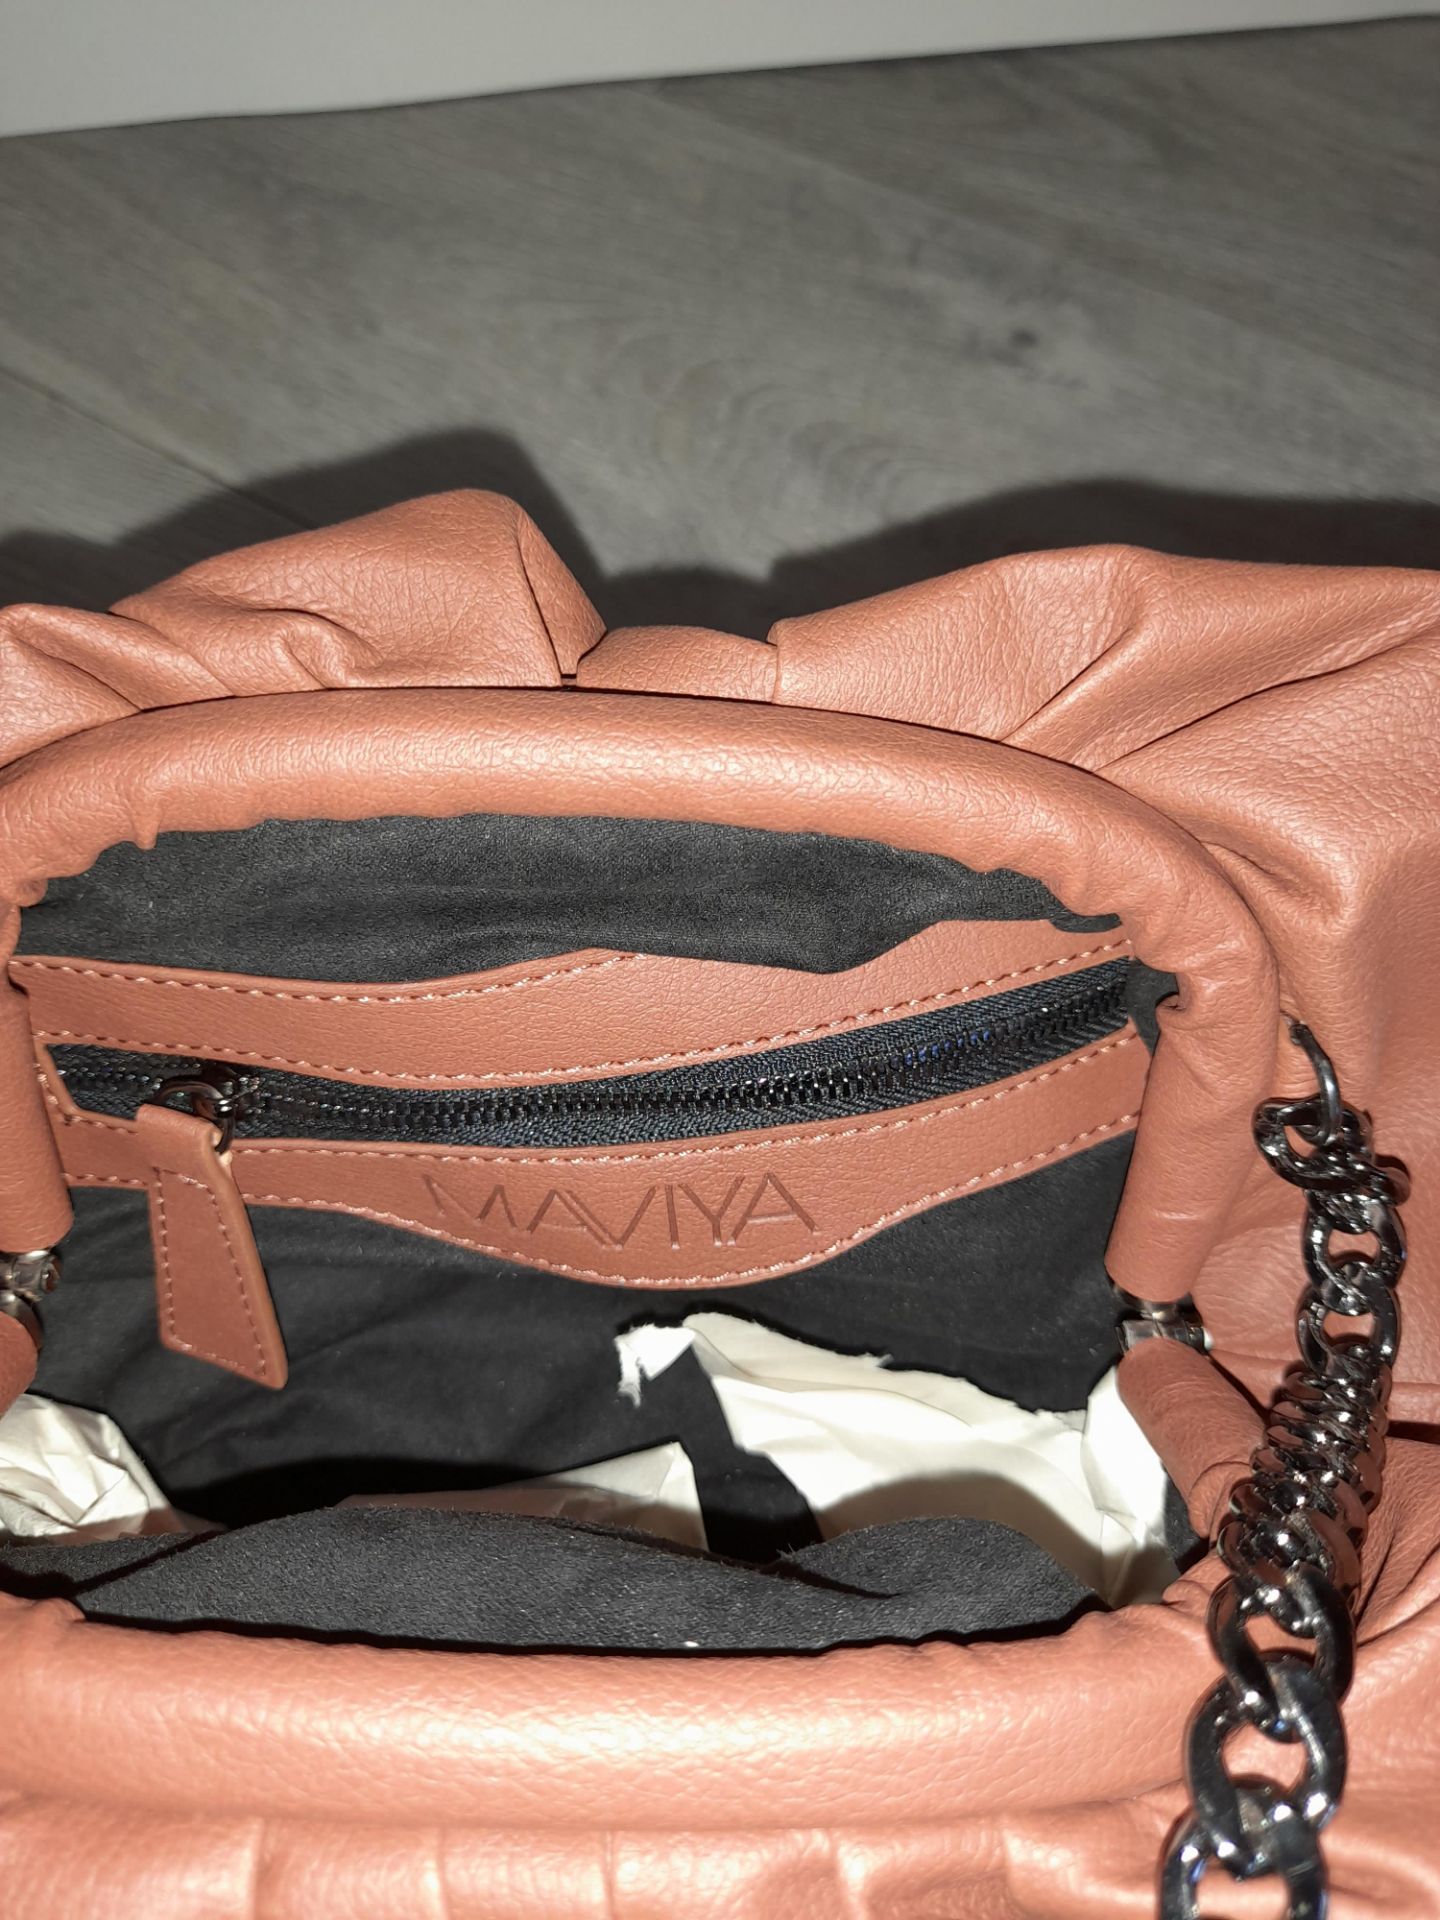 Maviya “Harmony Mini” Brown Small Slouchy Bag for Shoulder or Cross Body Wear with Faux Suede Lining - Image 3 of 3